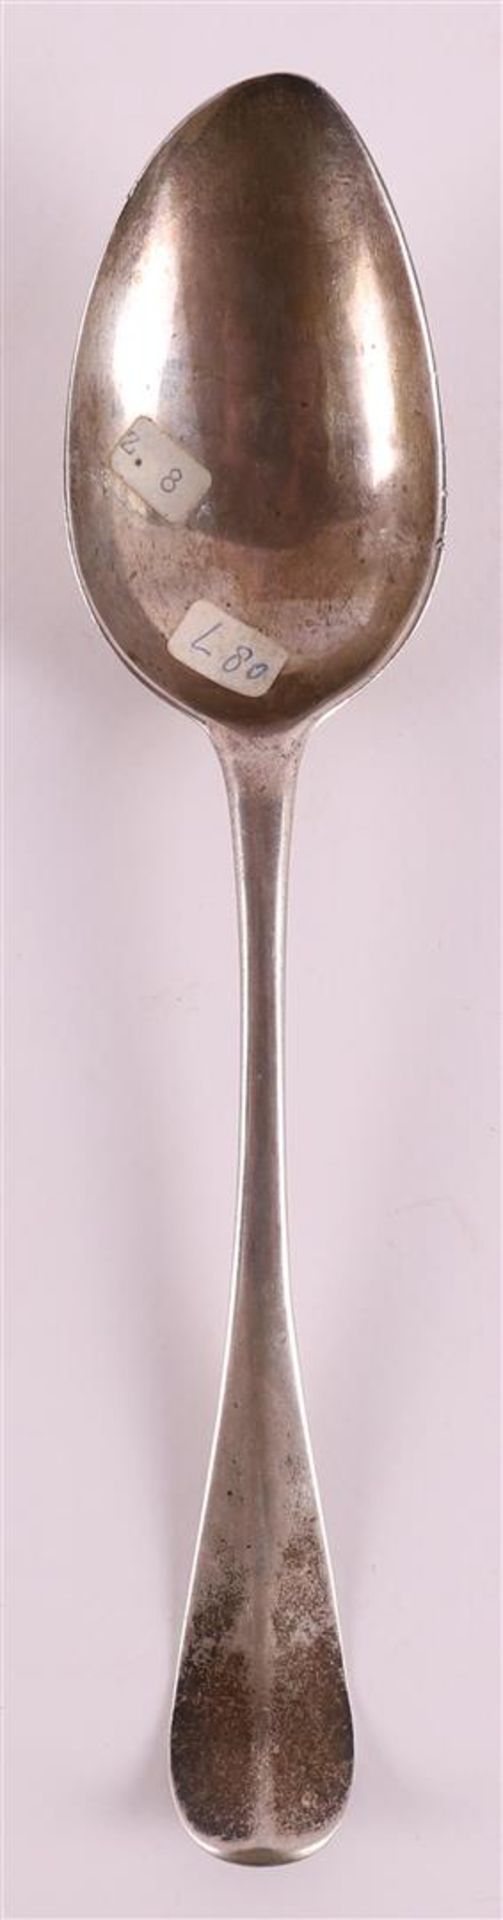 A silver memorial spoon with text, Groningen, year letter 1797/98.